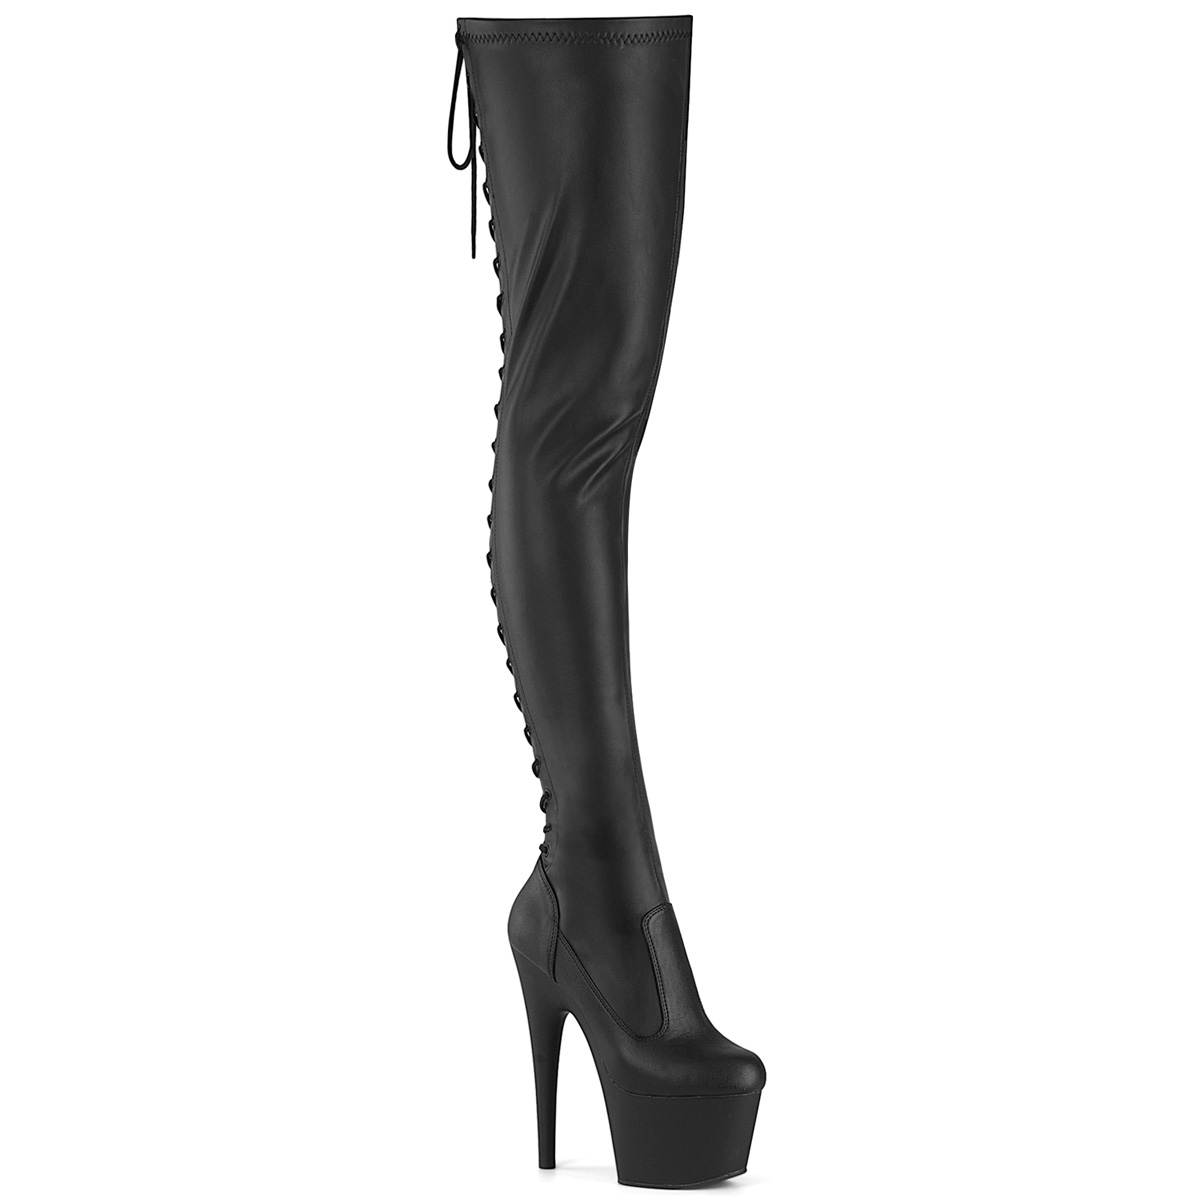 Pleaser SHOES & BOOTS : Platform Shoes : Thigh High Boots